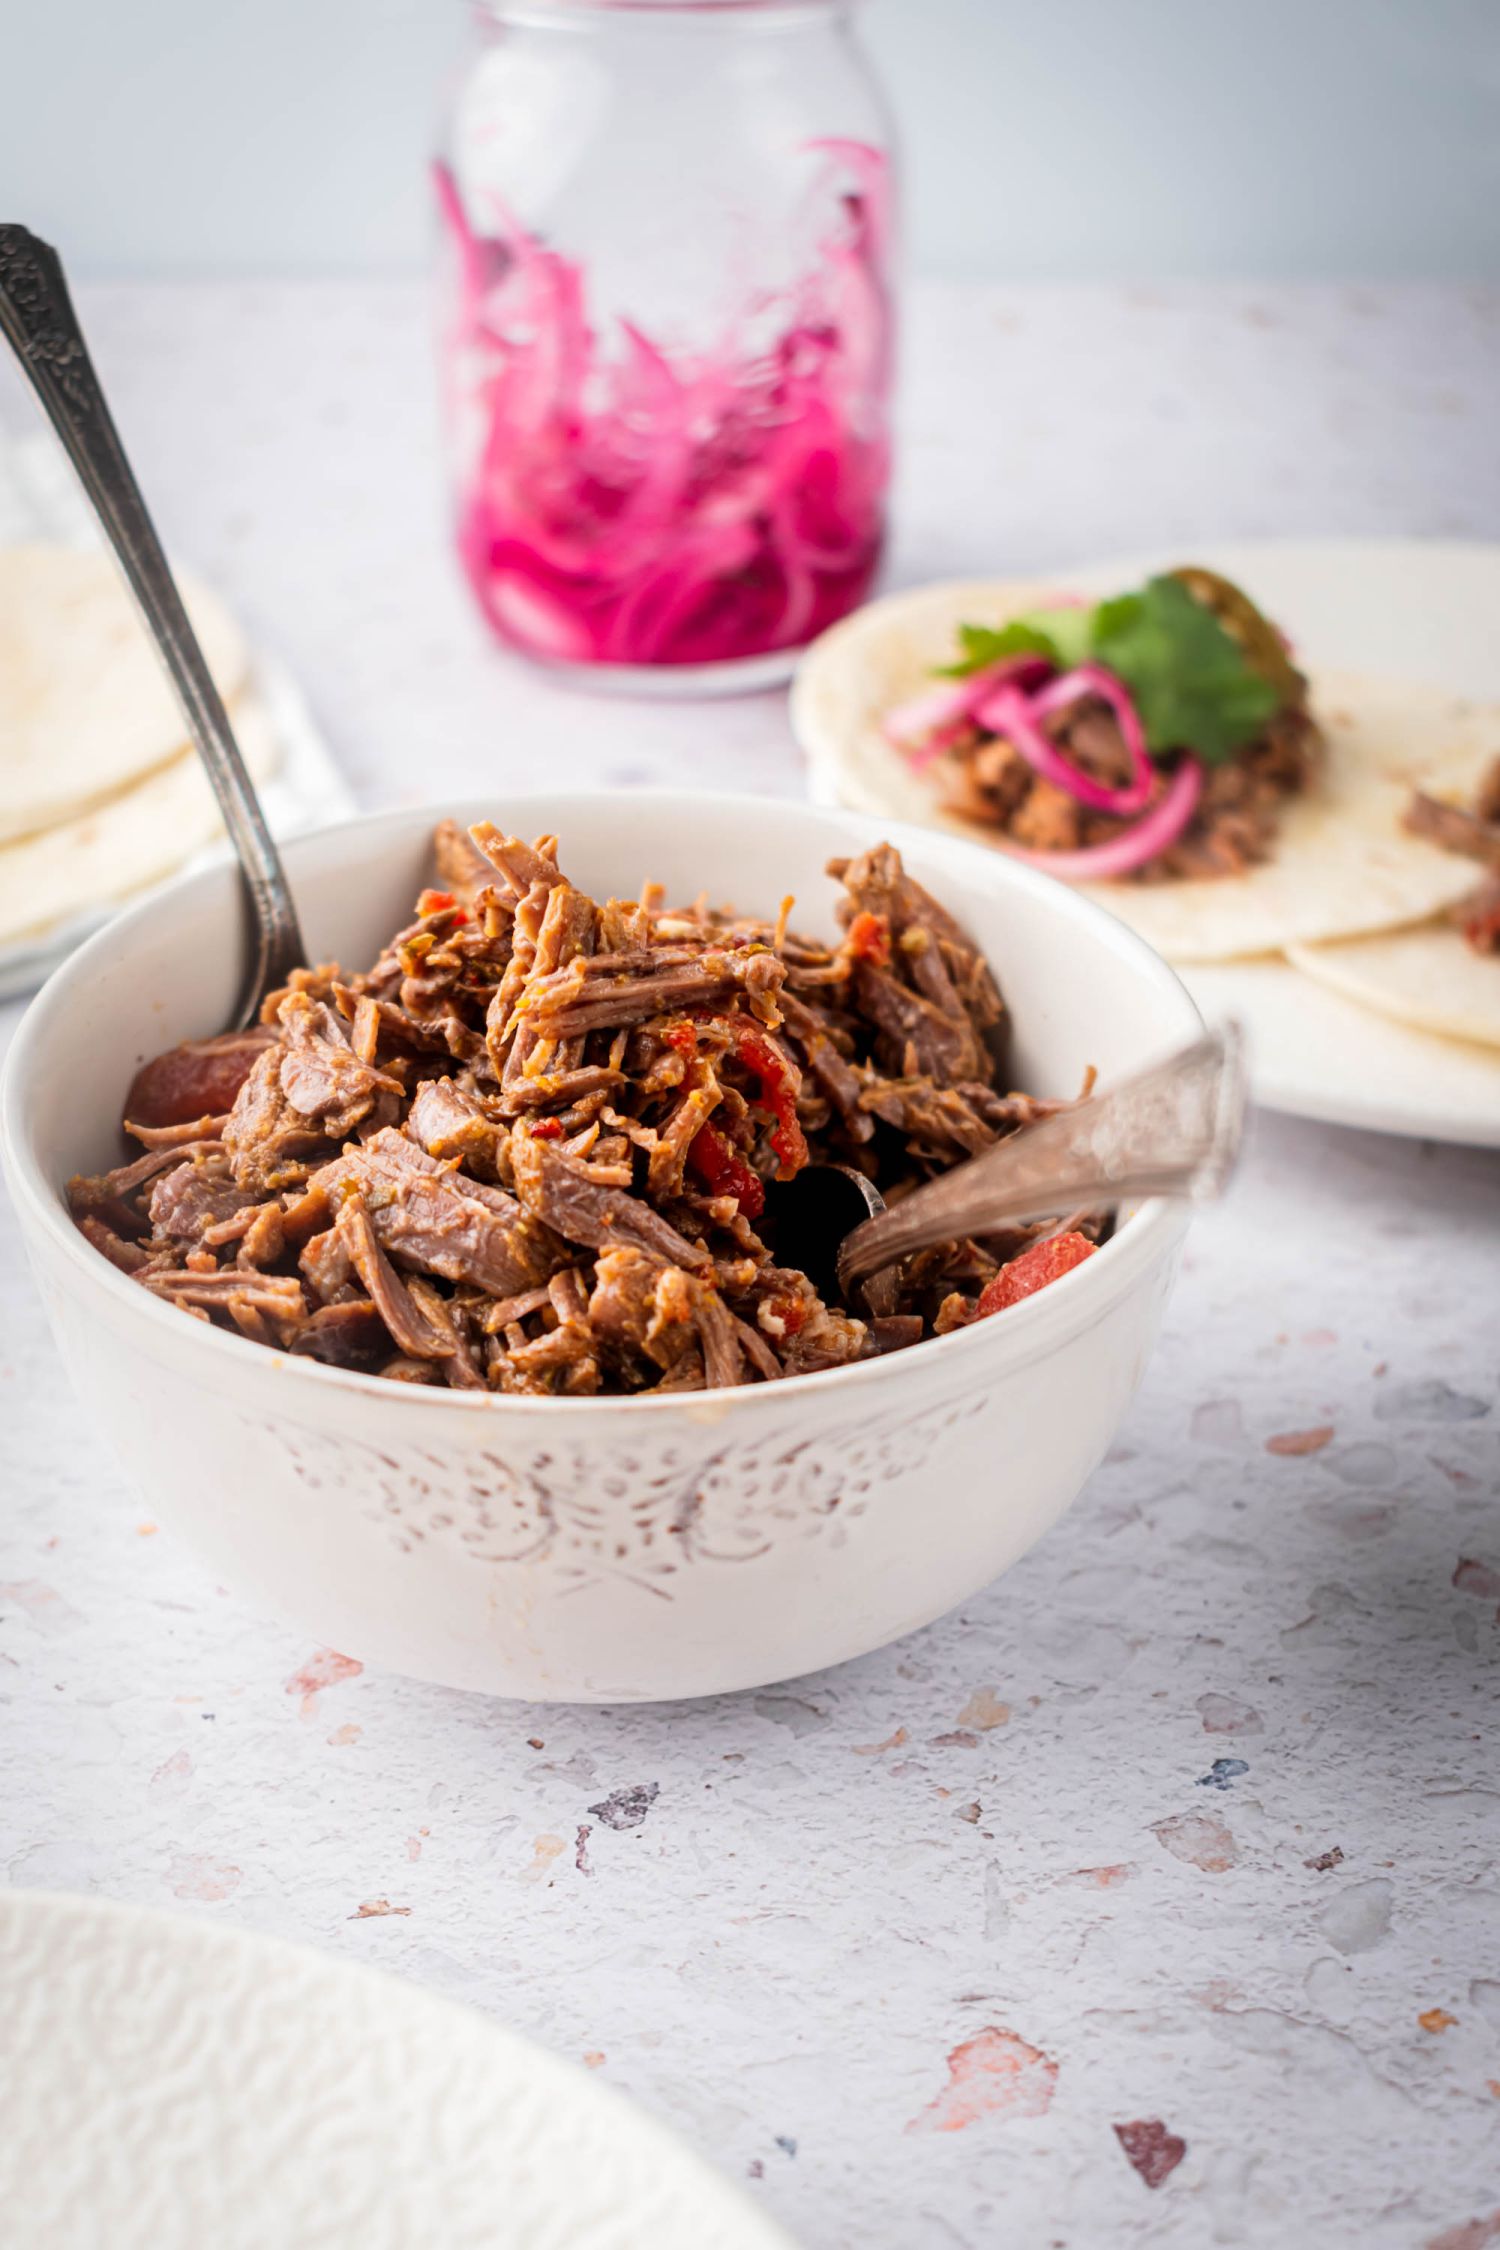 Shredded Mexican beef cooked in the slow cooker and served in a bowl with pickled red onions and wrapped in tortillas.